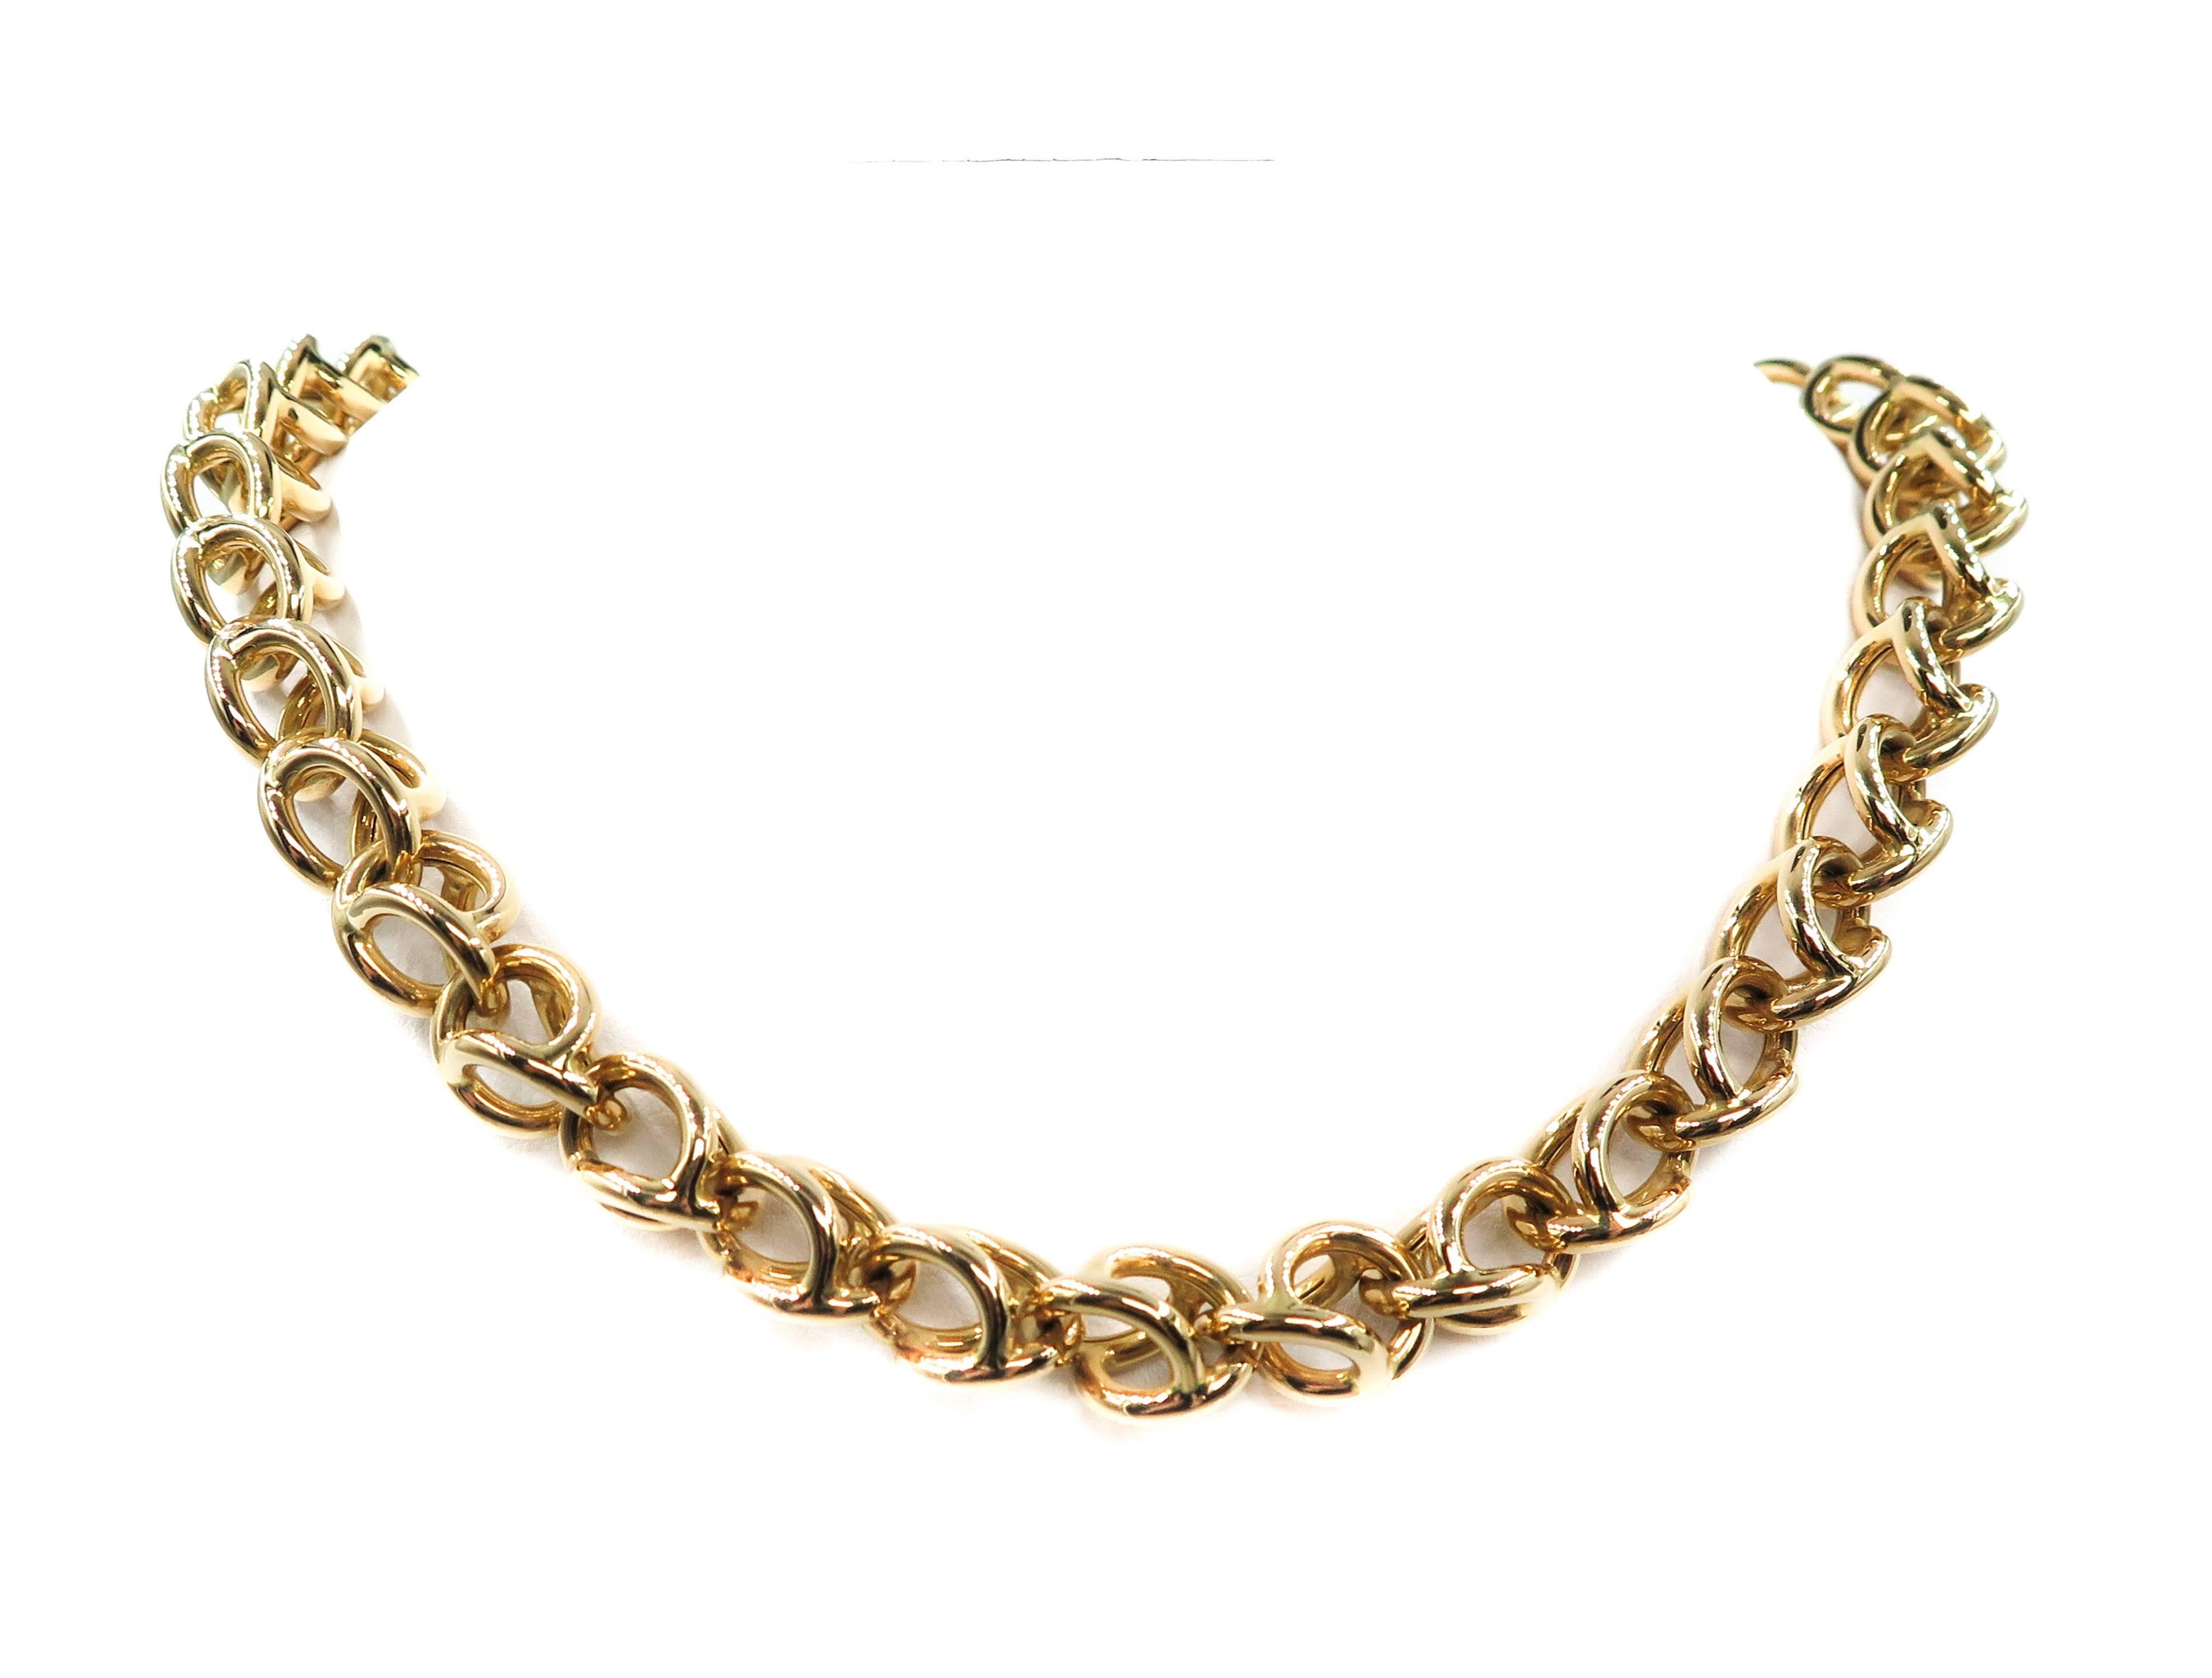 This extraordinary necklace, reflects the immeasurably precious capability, workmanship and manual skills developed by Louis Fiessler over the years. 
Contrary to all fast moving trends the goldsmiths of Pforzheim - Germany, create the finest